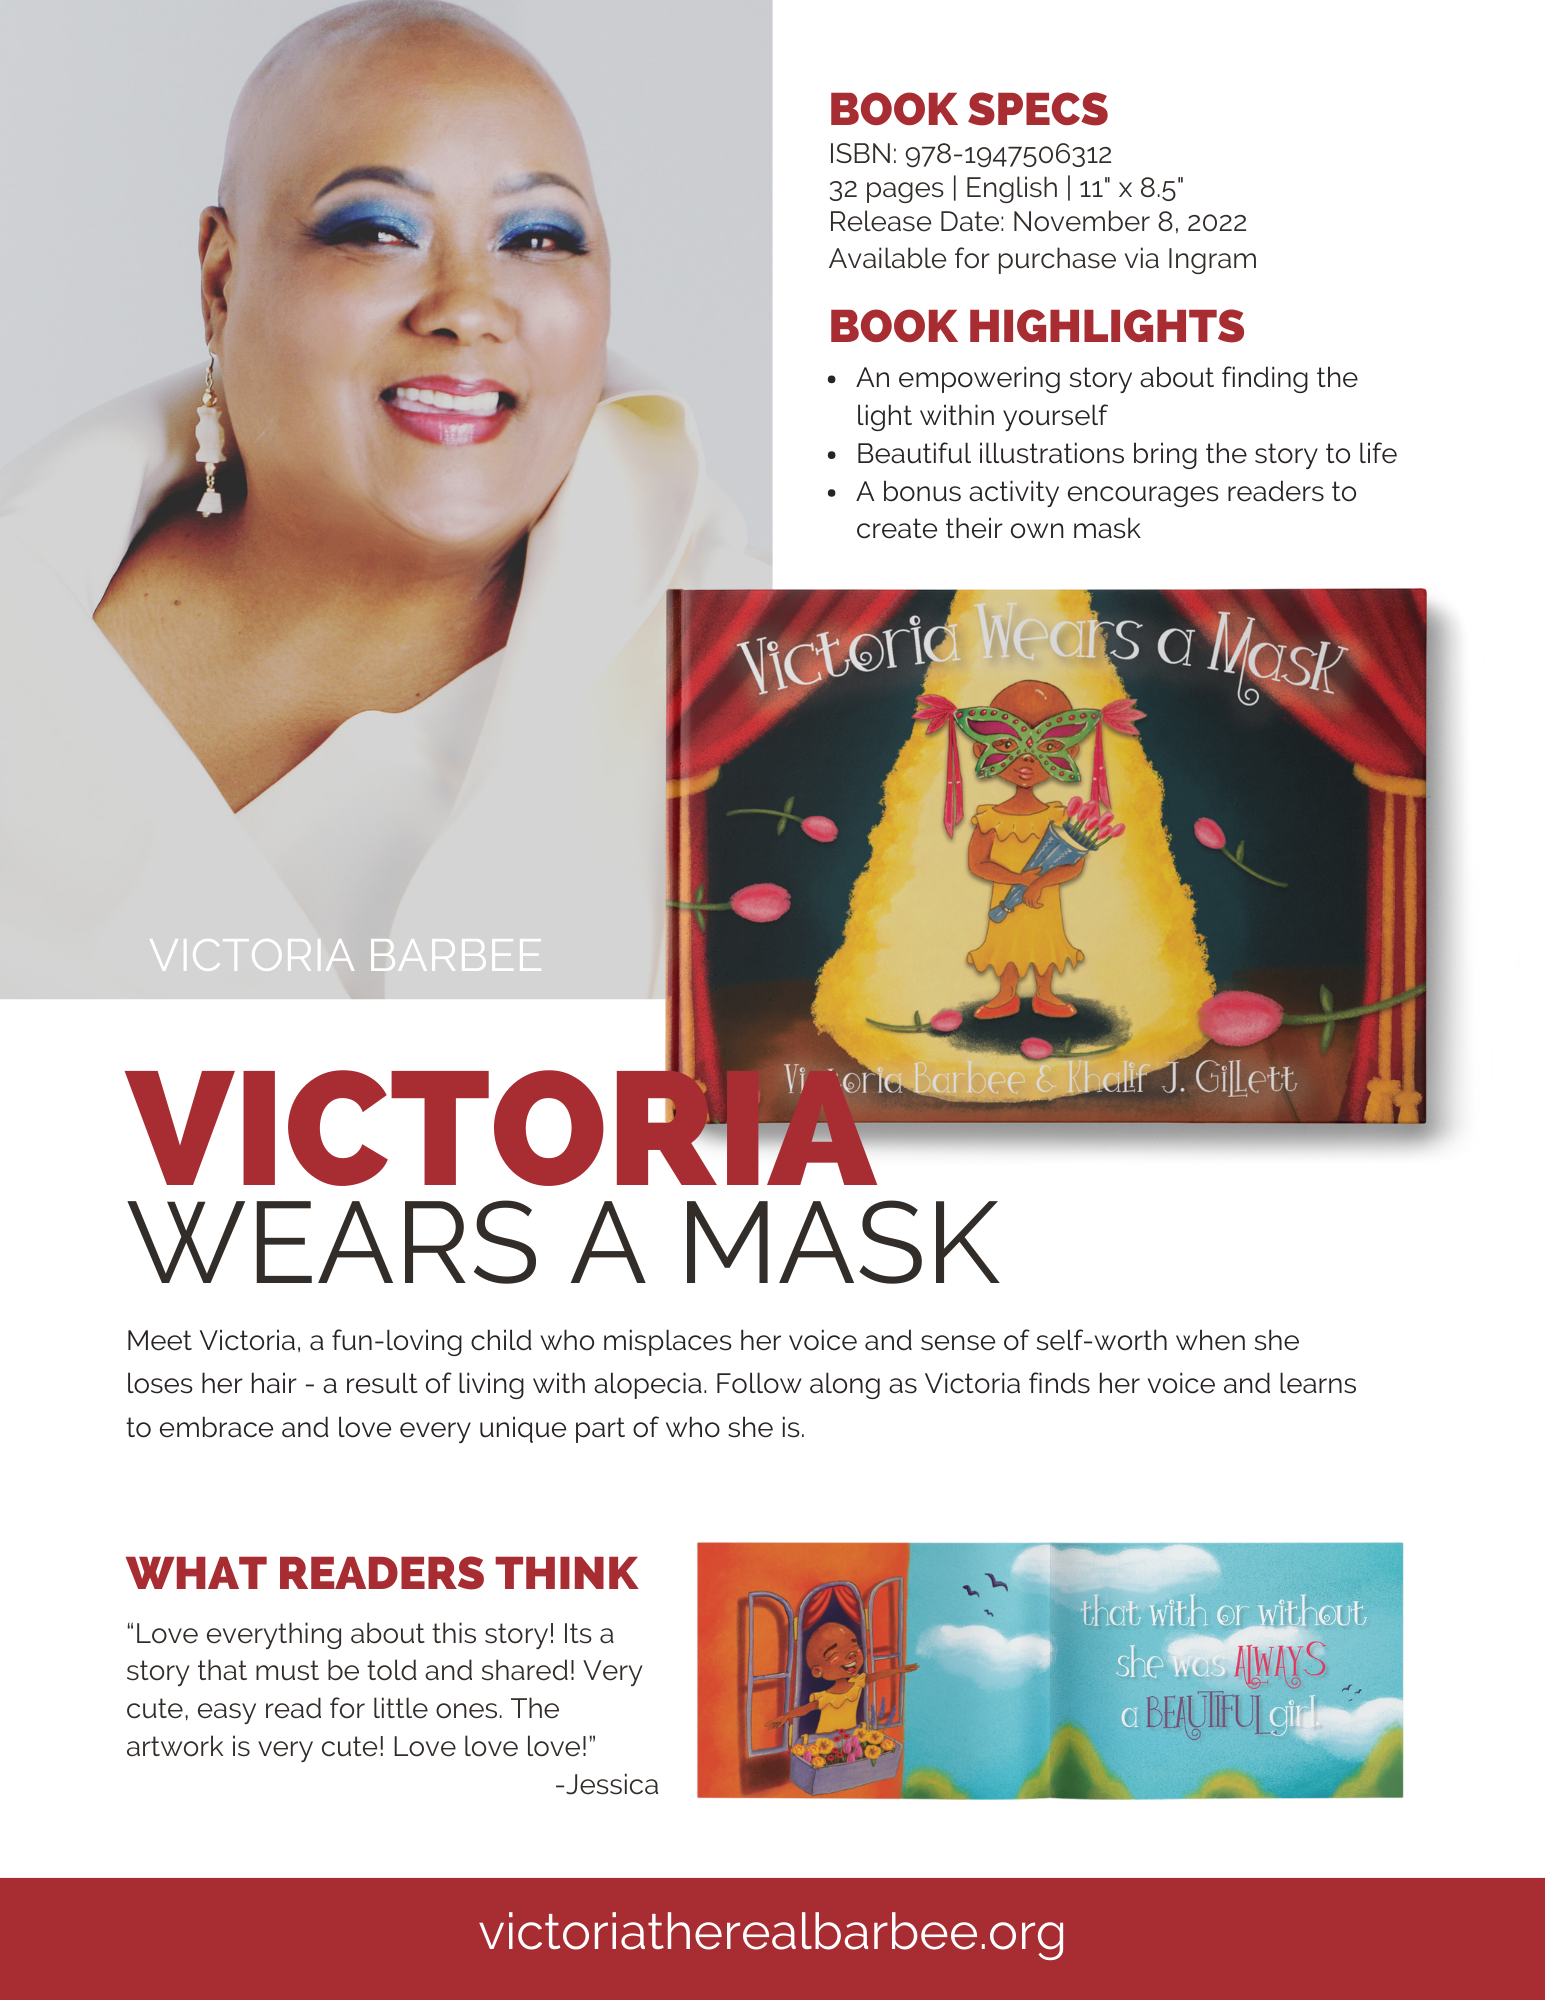 Author Media sheet featuring book information, a picture of the author, and the book cover for Victoria Wears a Mask. 